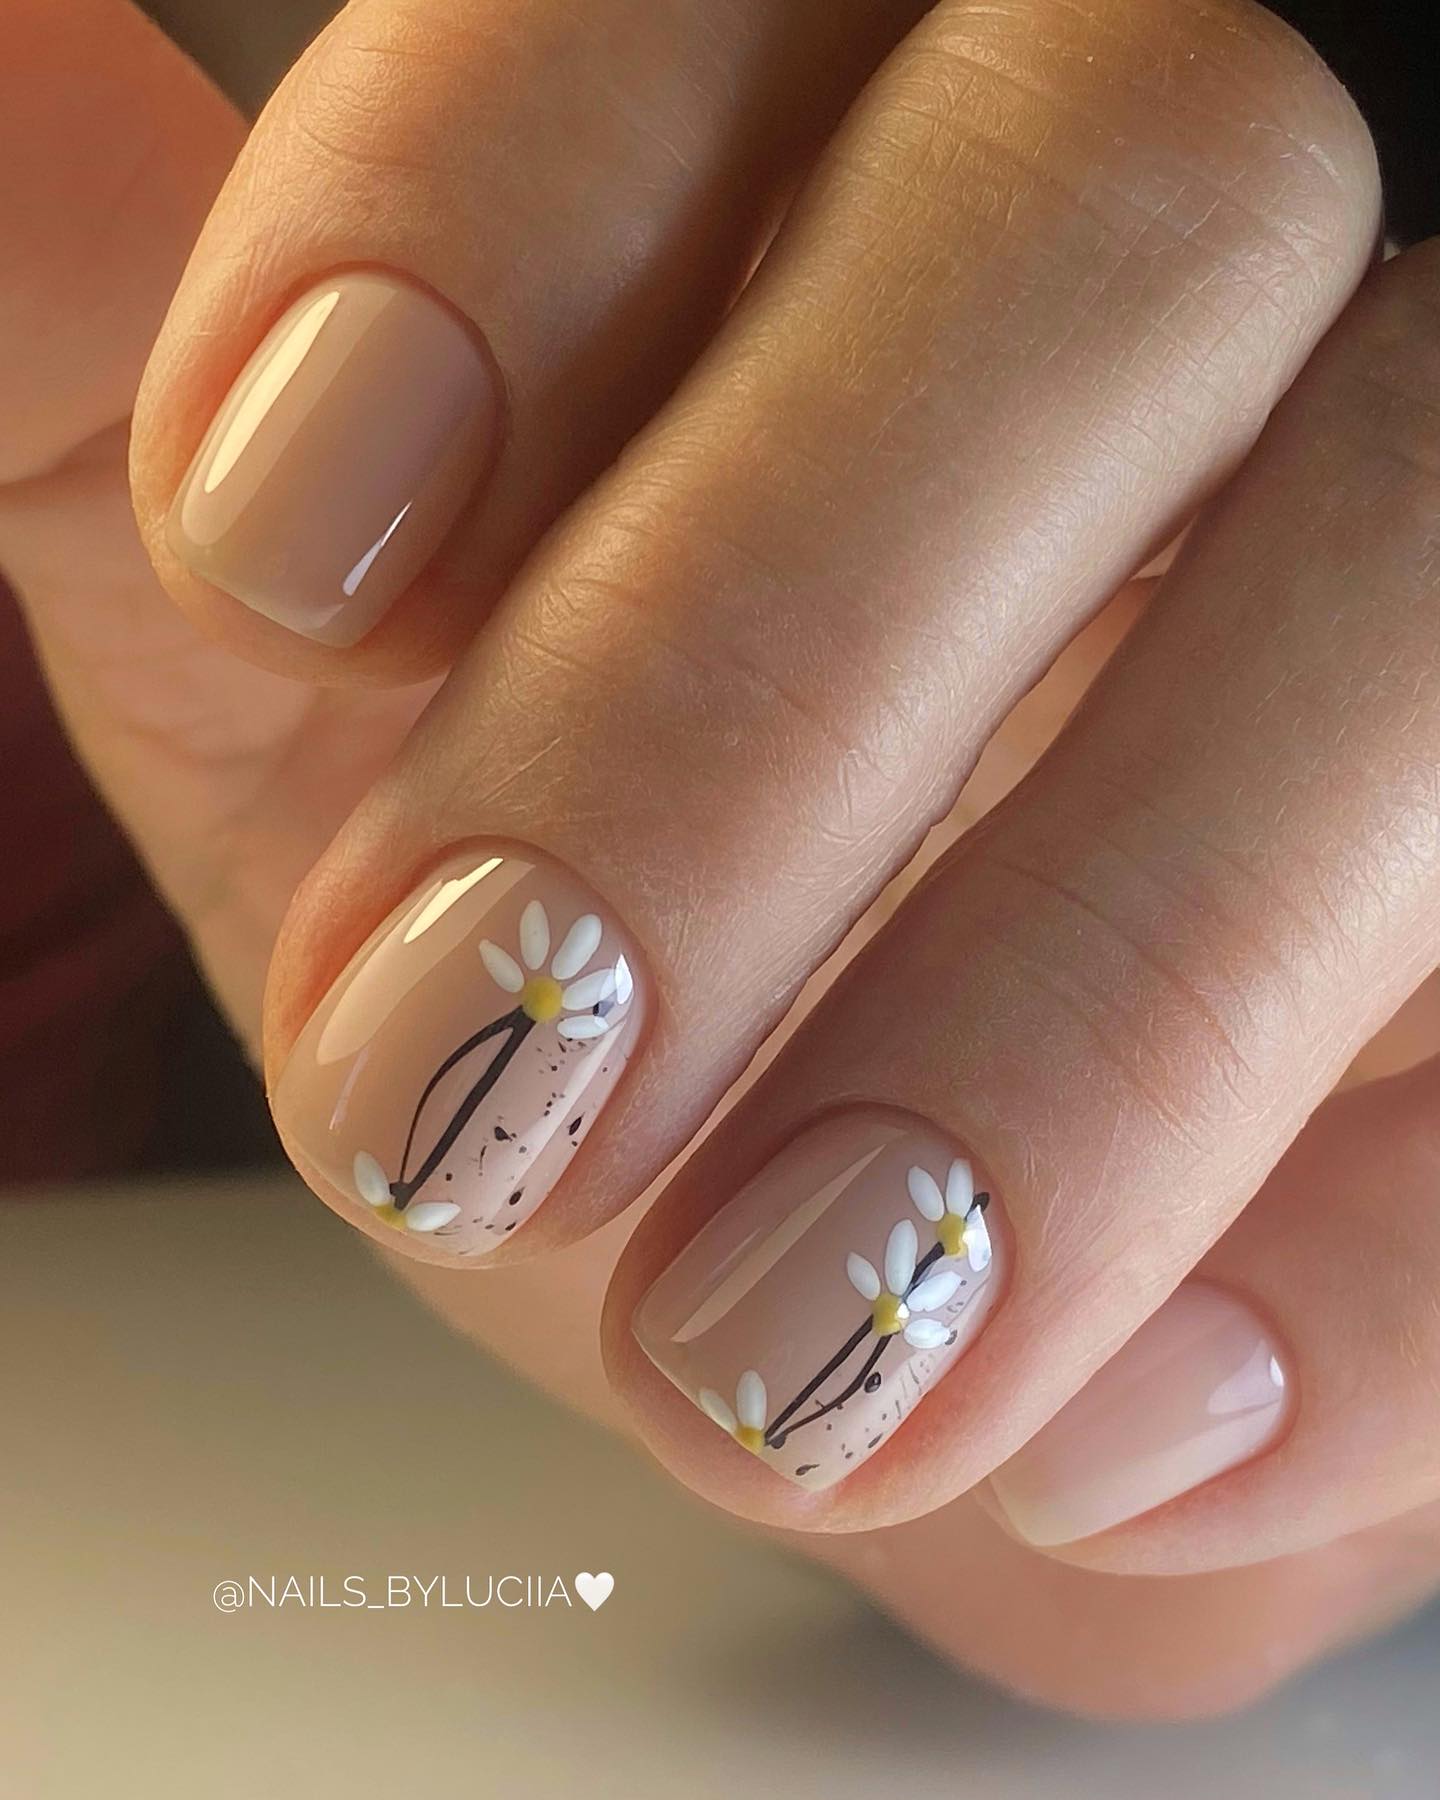 100 Pretty Spring Nail Designs To Try This Year images 36